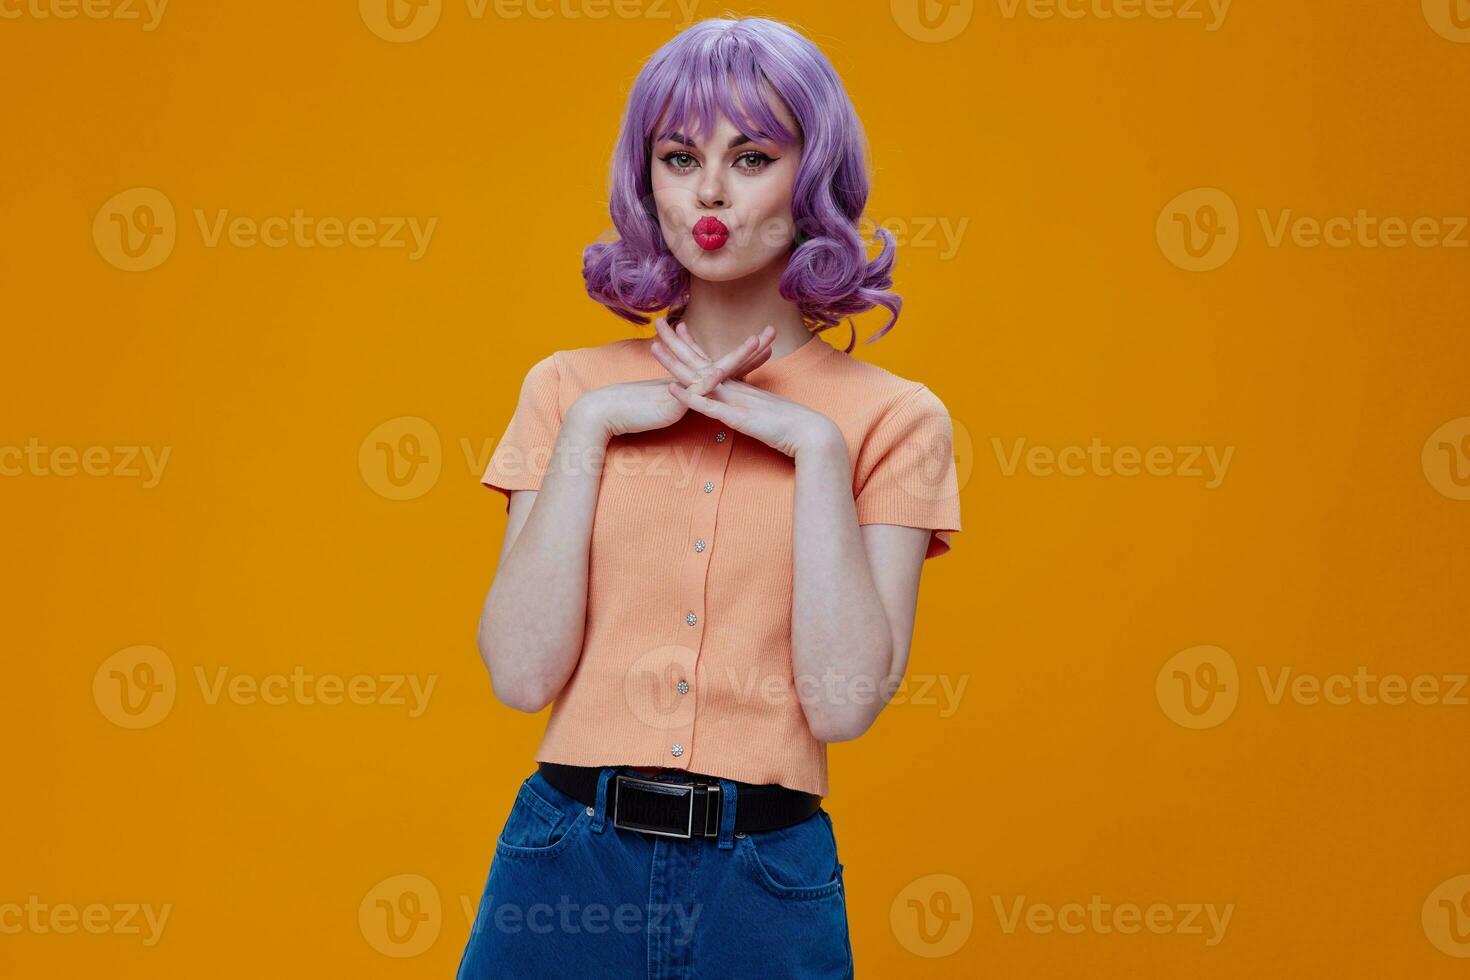 pretty woman hand gestures purple hair fashion clothes color background unaltered photo